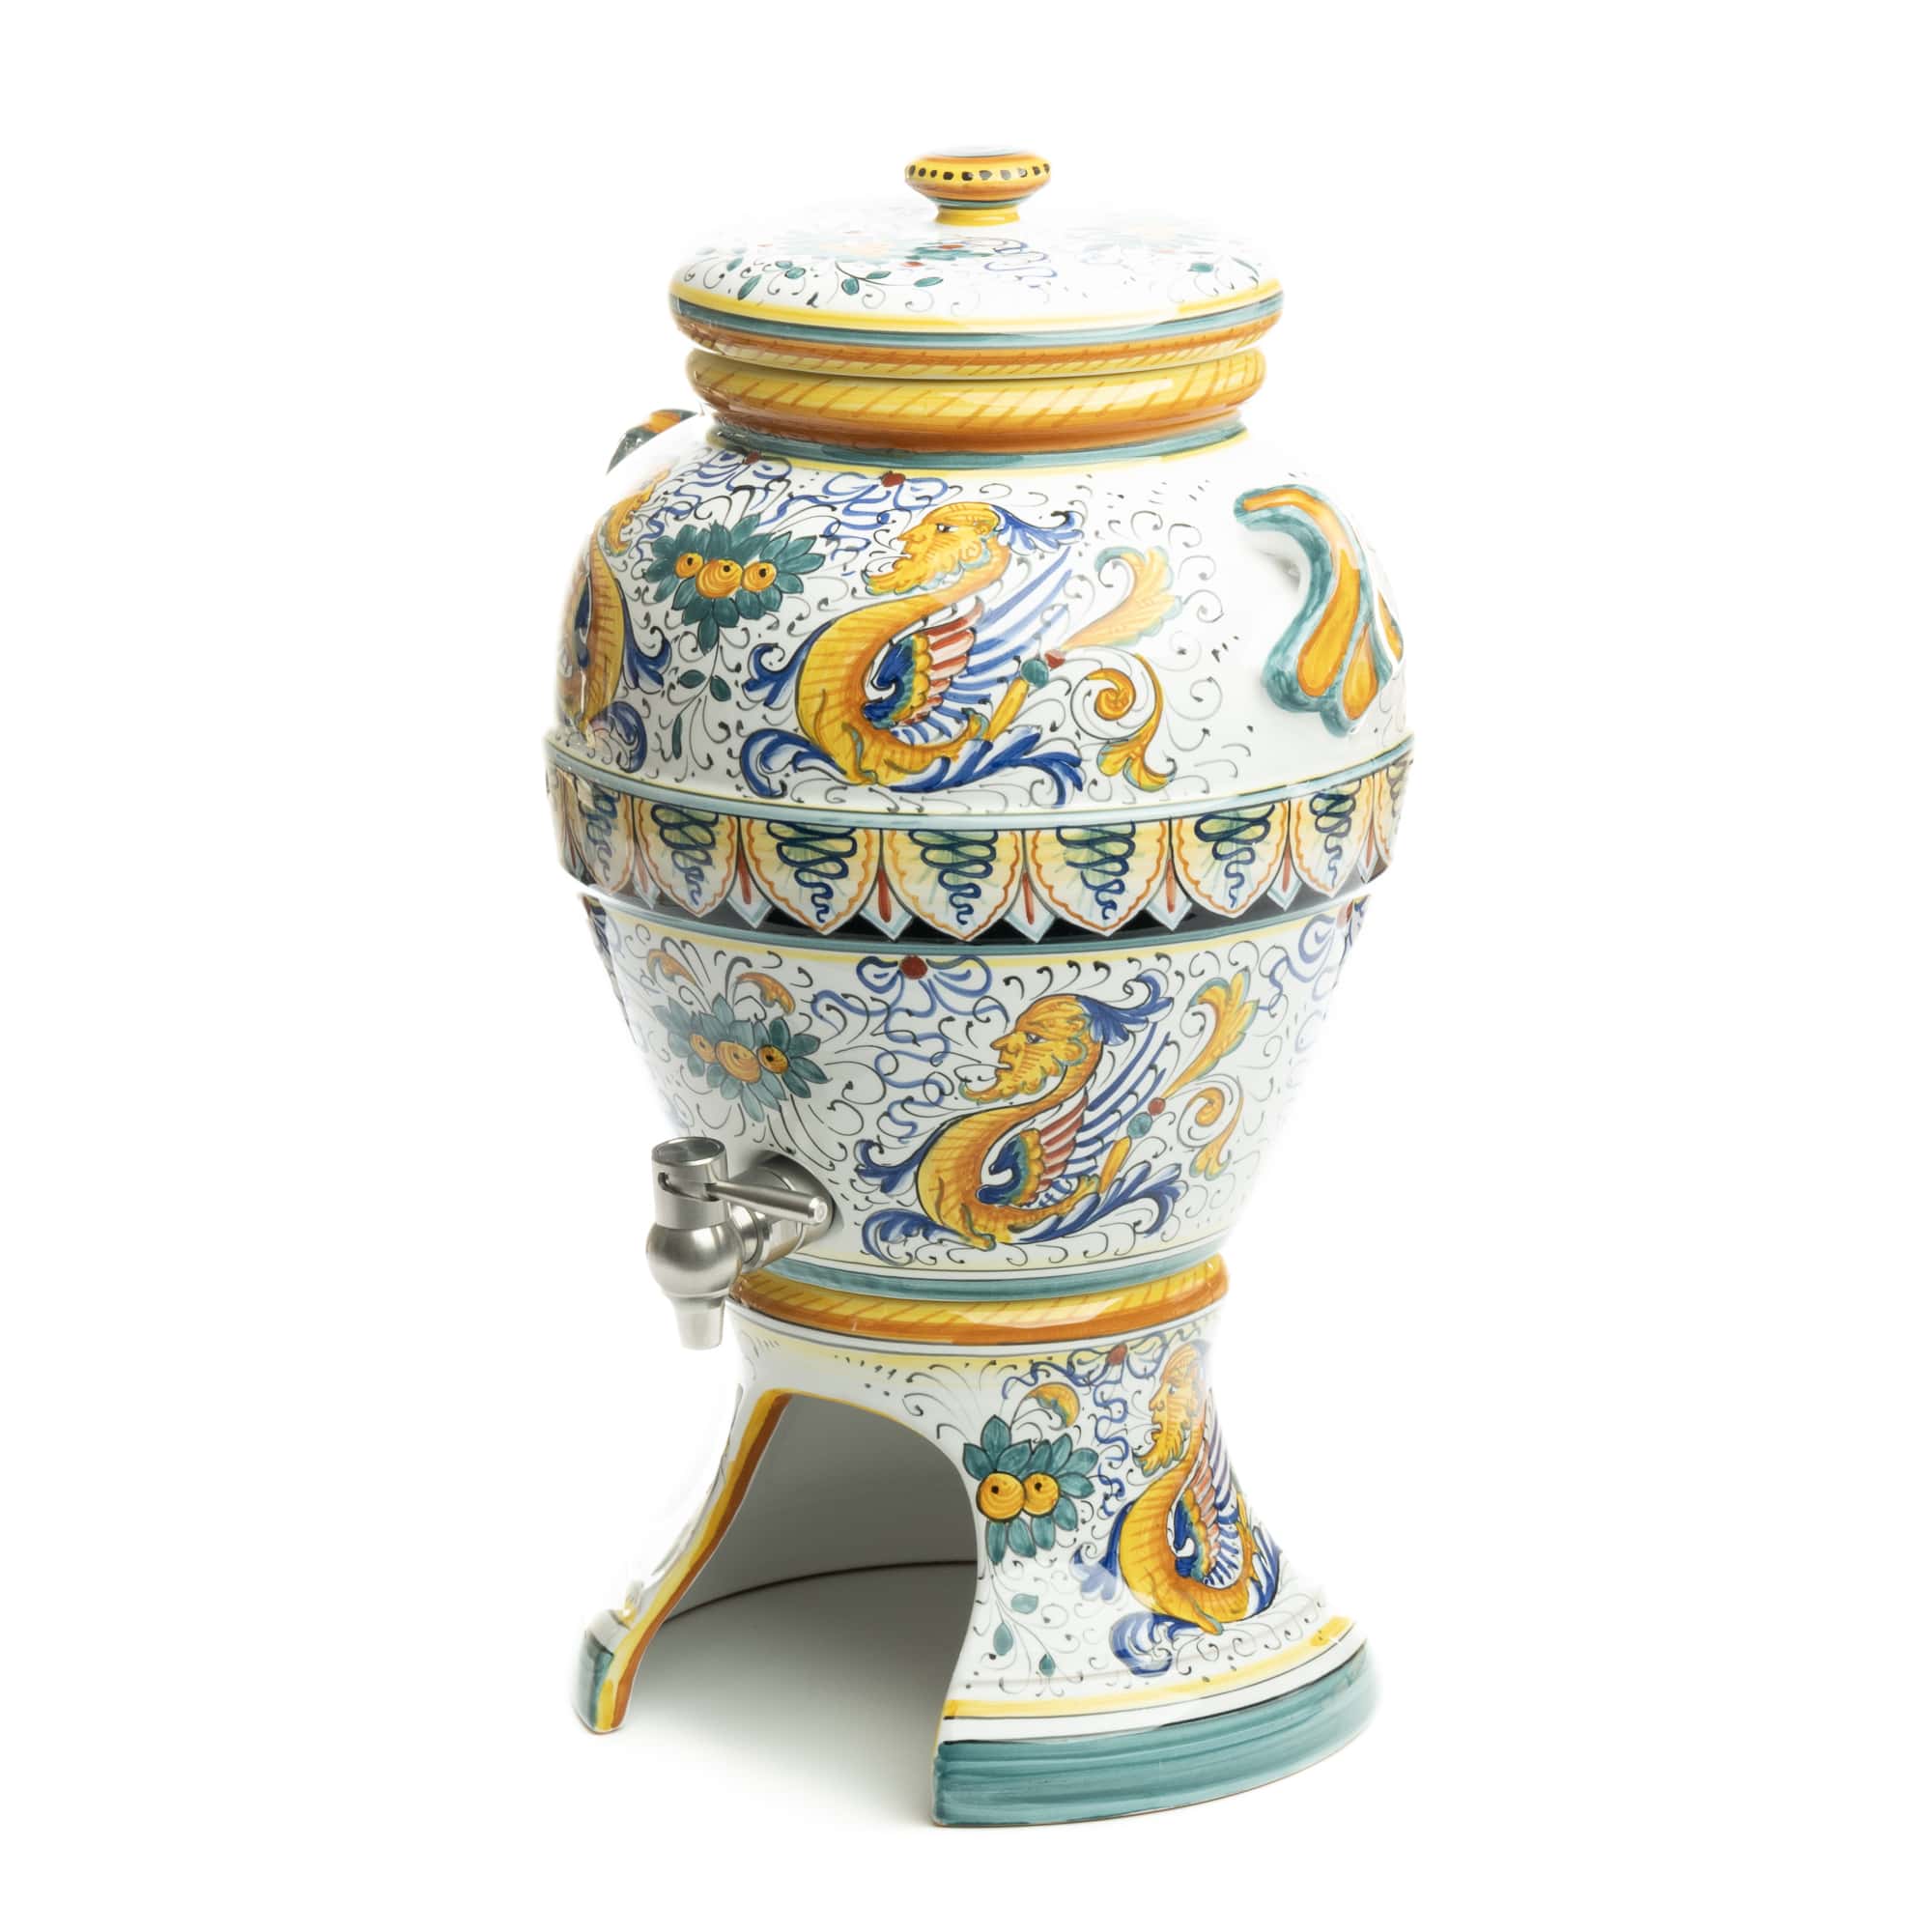 Raffaellesco Beverage Dispenser, ceramics, pottery, italian design, majolica, handmade, handcrafted, handpainted, home decor, kitchen art, home goods, deruta, majolica, Artisan, treasures, traditional art, modern art, gift ideas, style, SF, shop small business, artists, shop online, landmark store, legacy, one of a kind, limited edition, gift guide, gift shop, retail shop, decorations, shopping, italy, home staging, home decorating, home interiors